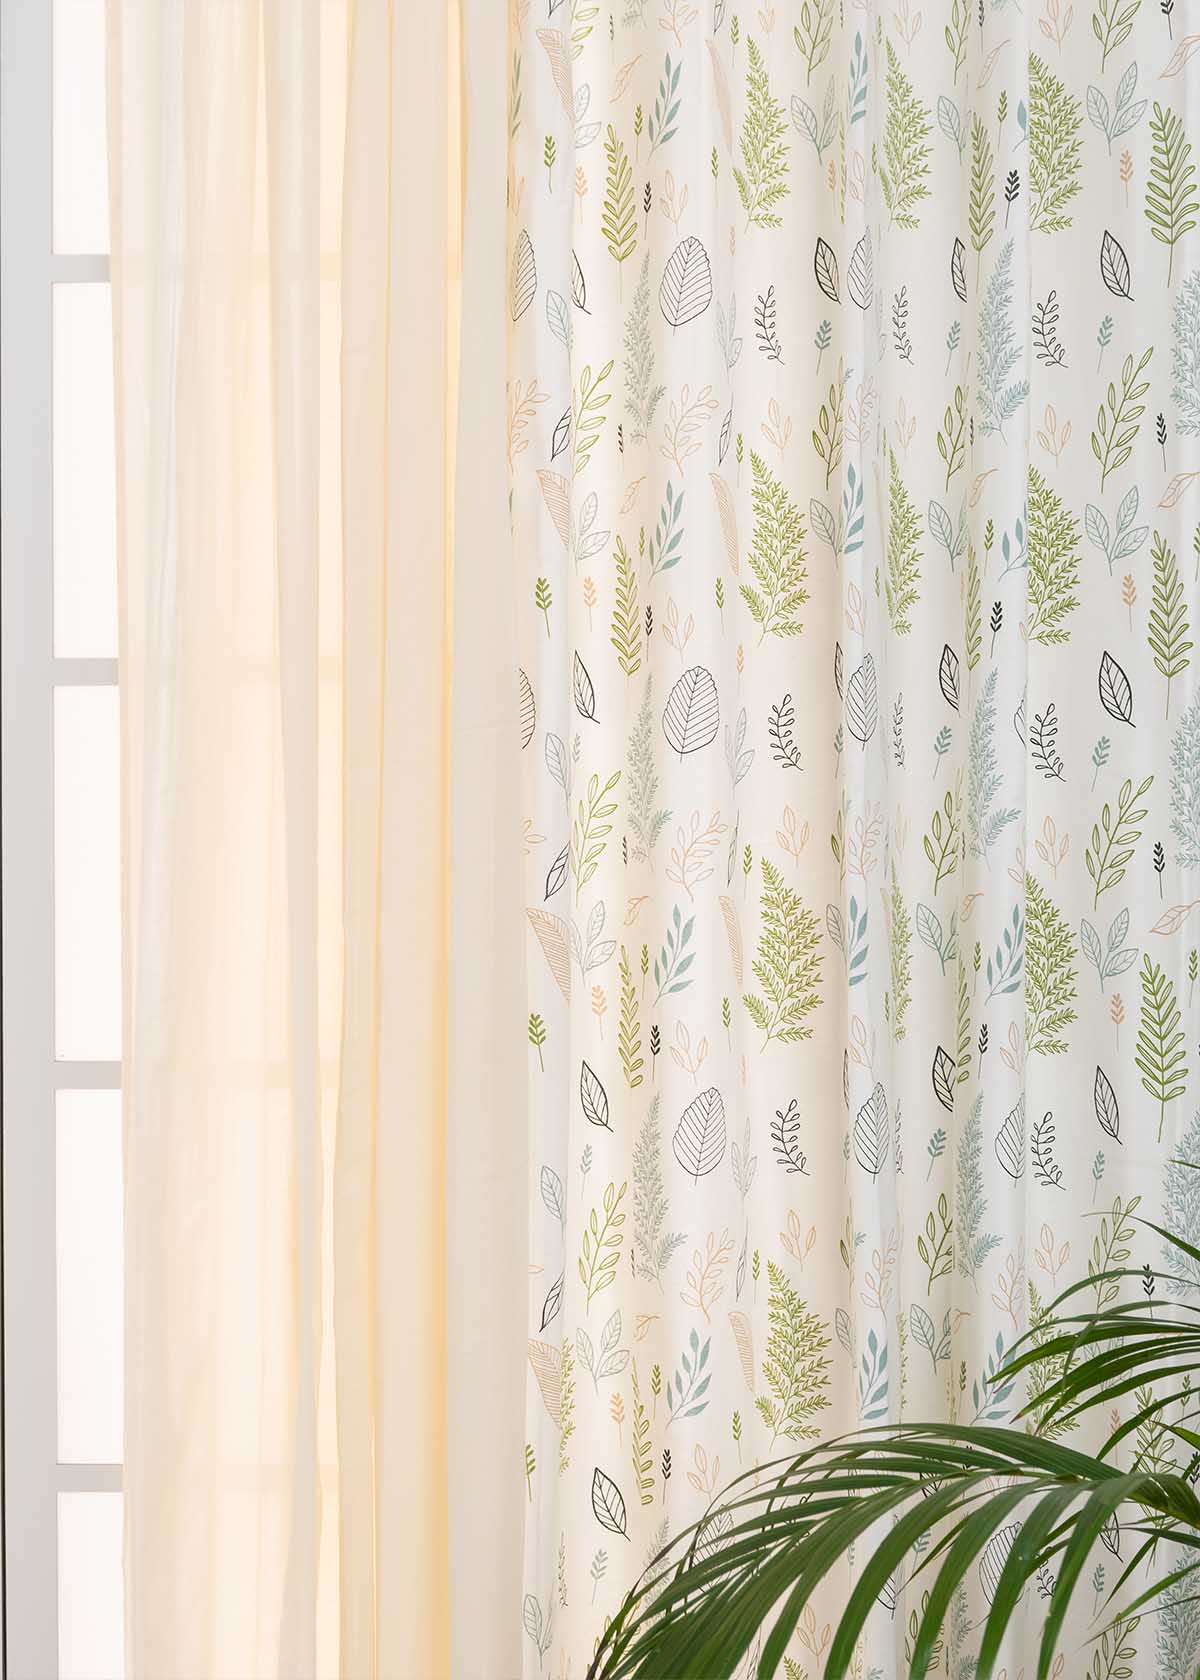 Rustling Leaves, Cream Sheer Set Of 4 Combo Cotton Curtain - Green And Cream